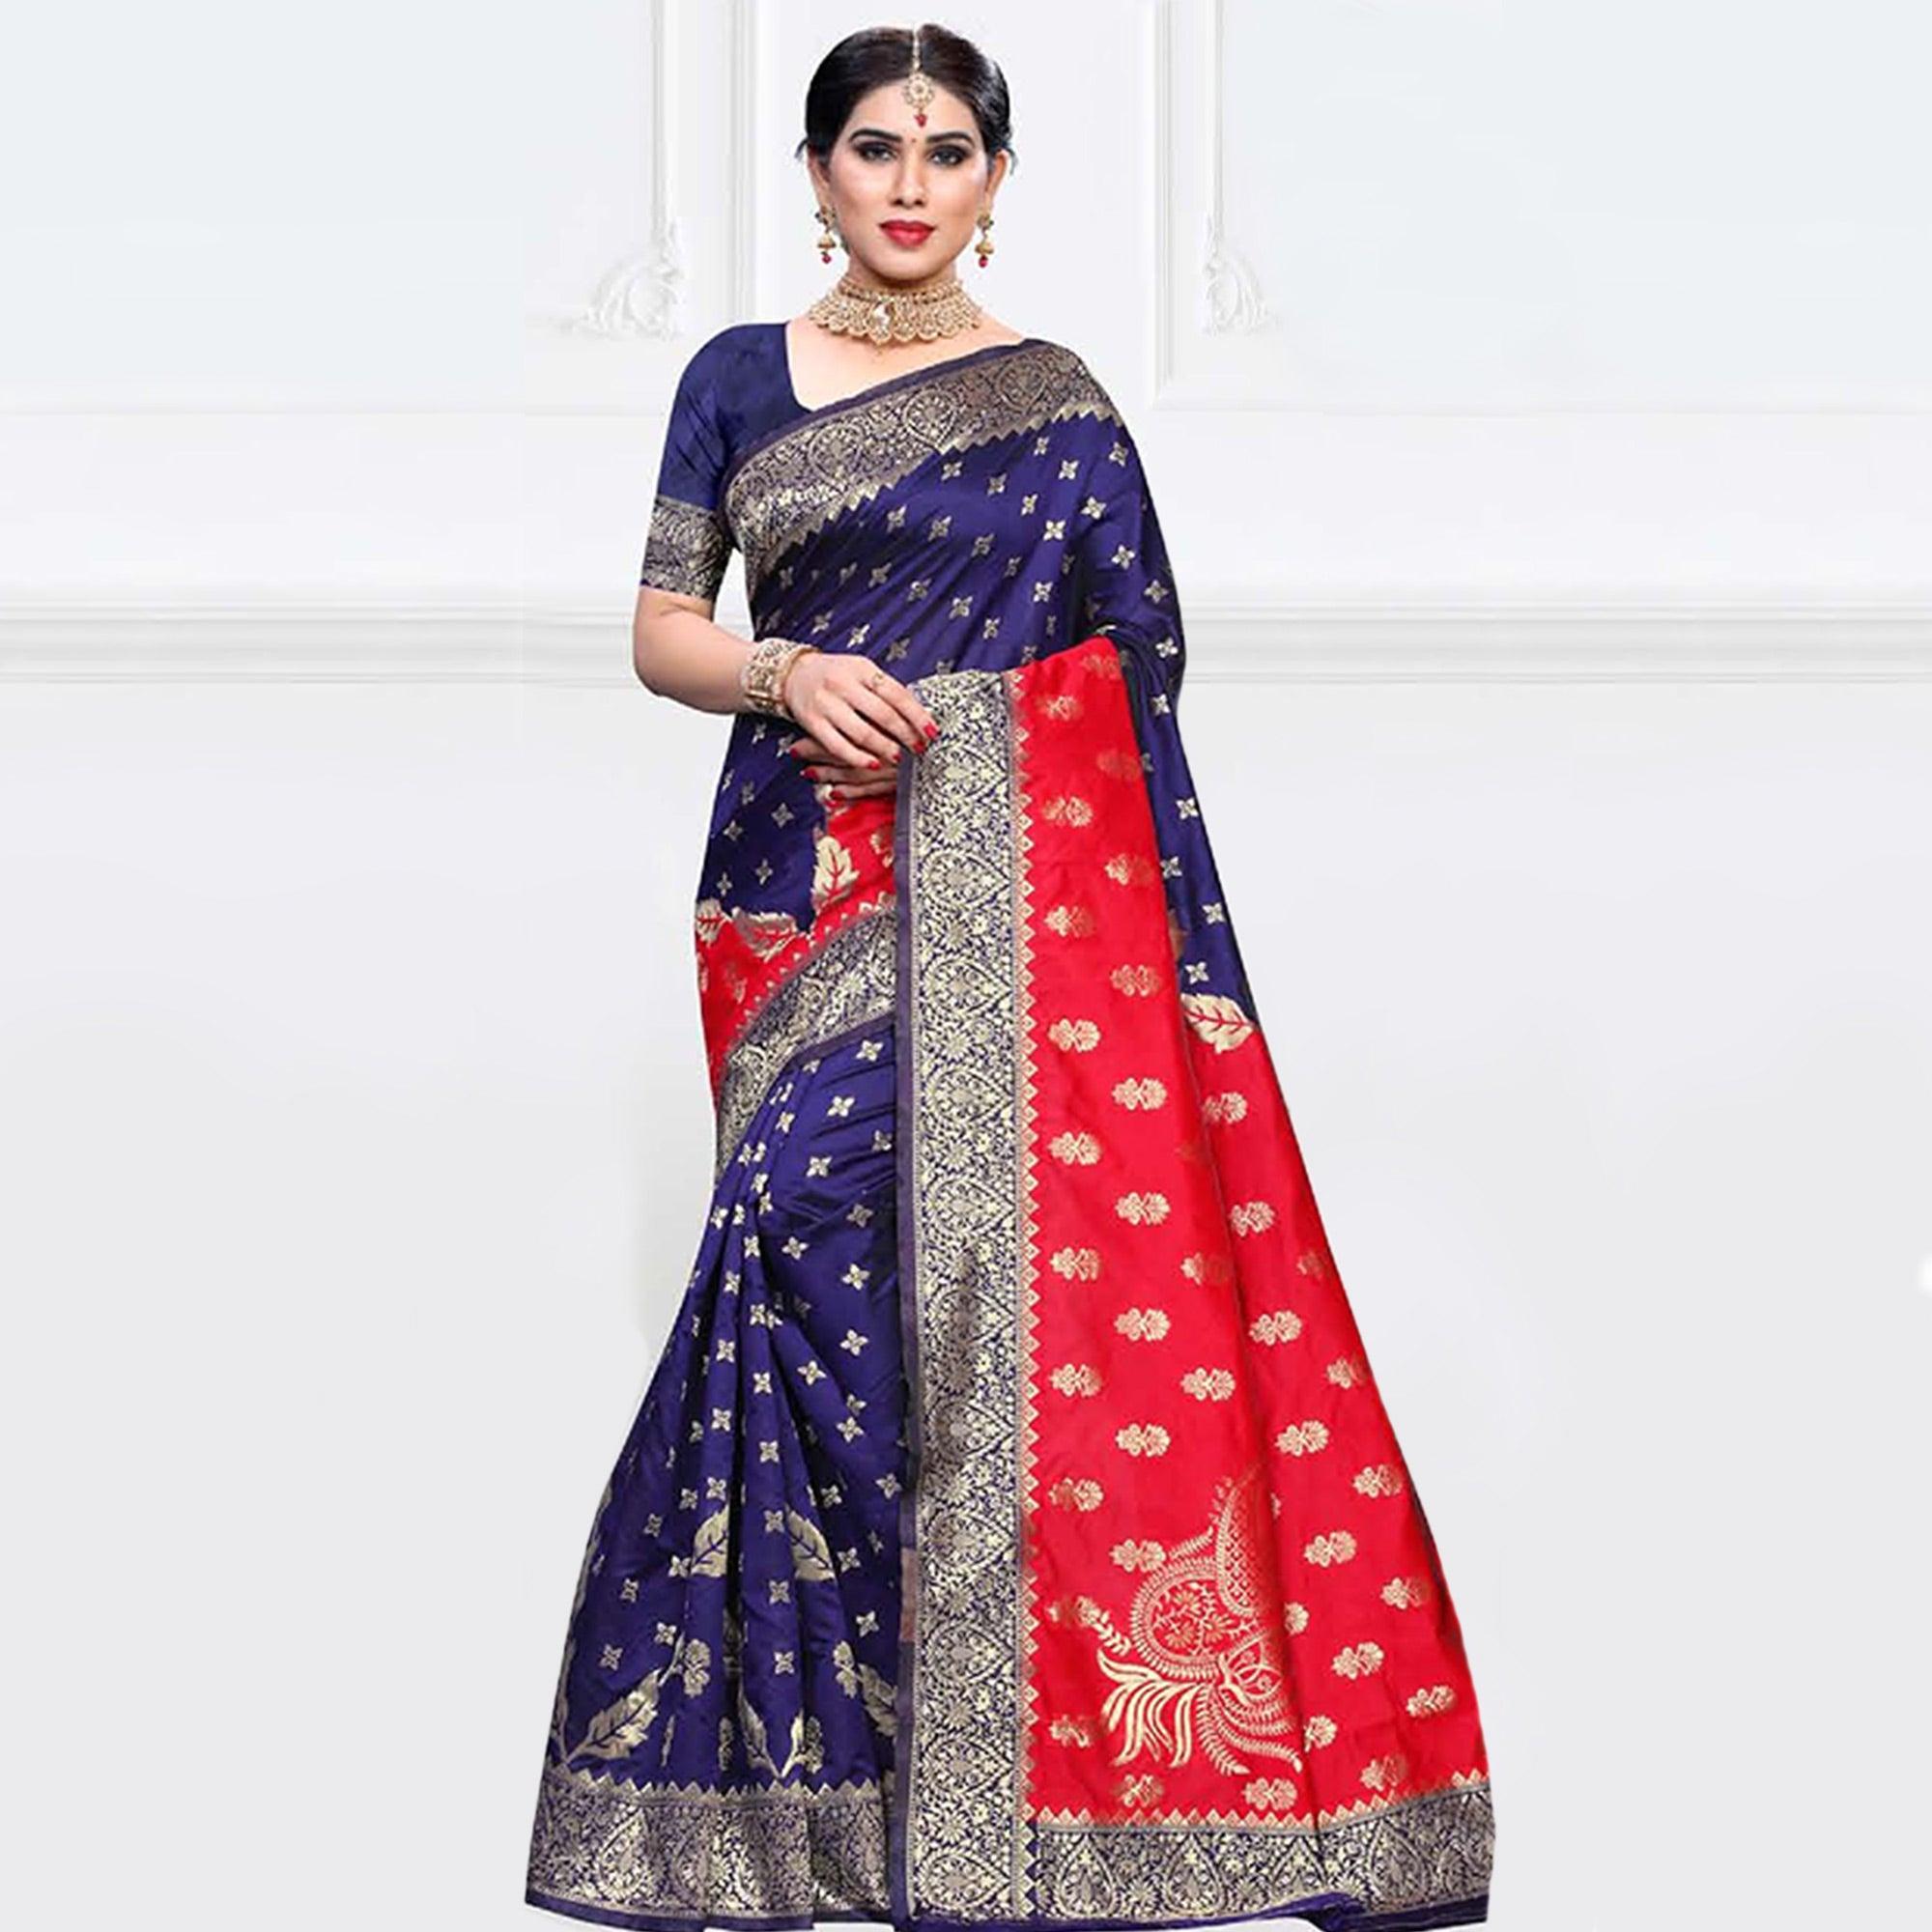 Energetic Navy Blue - Red Colored Festive Wear Woven Art Silk Saree - Peachmode